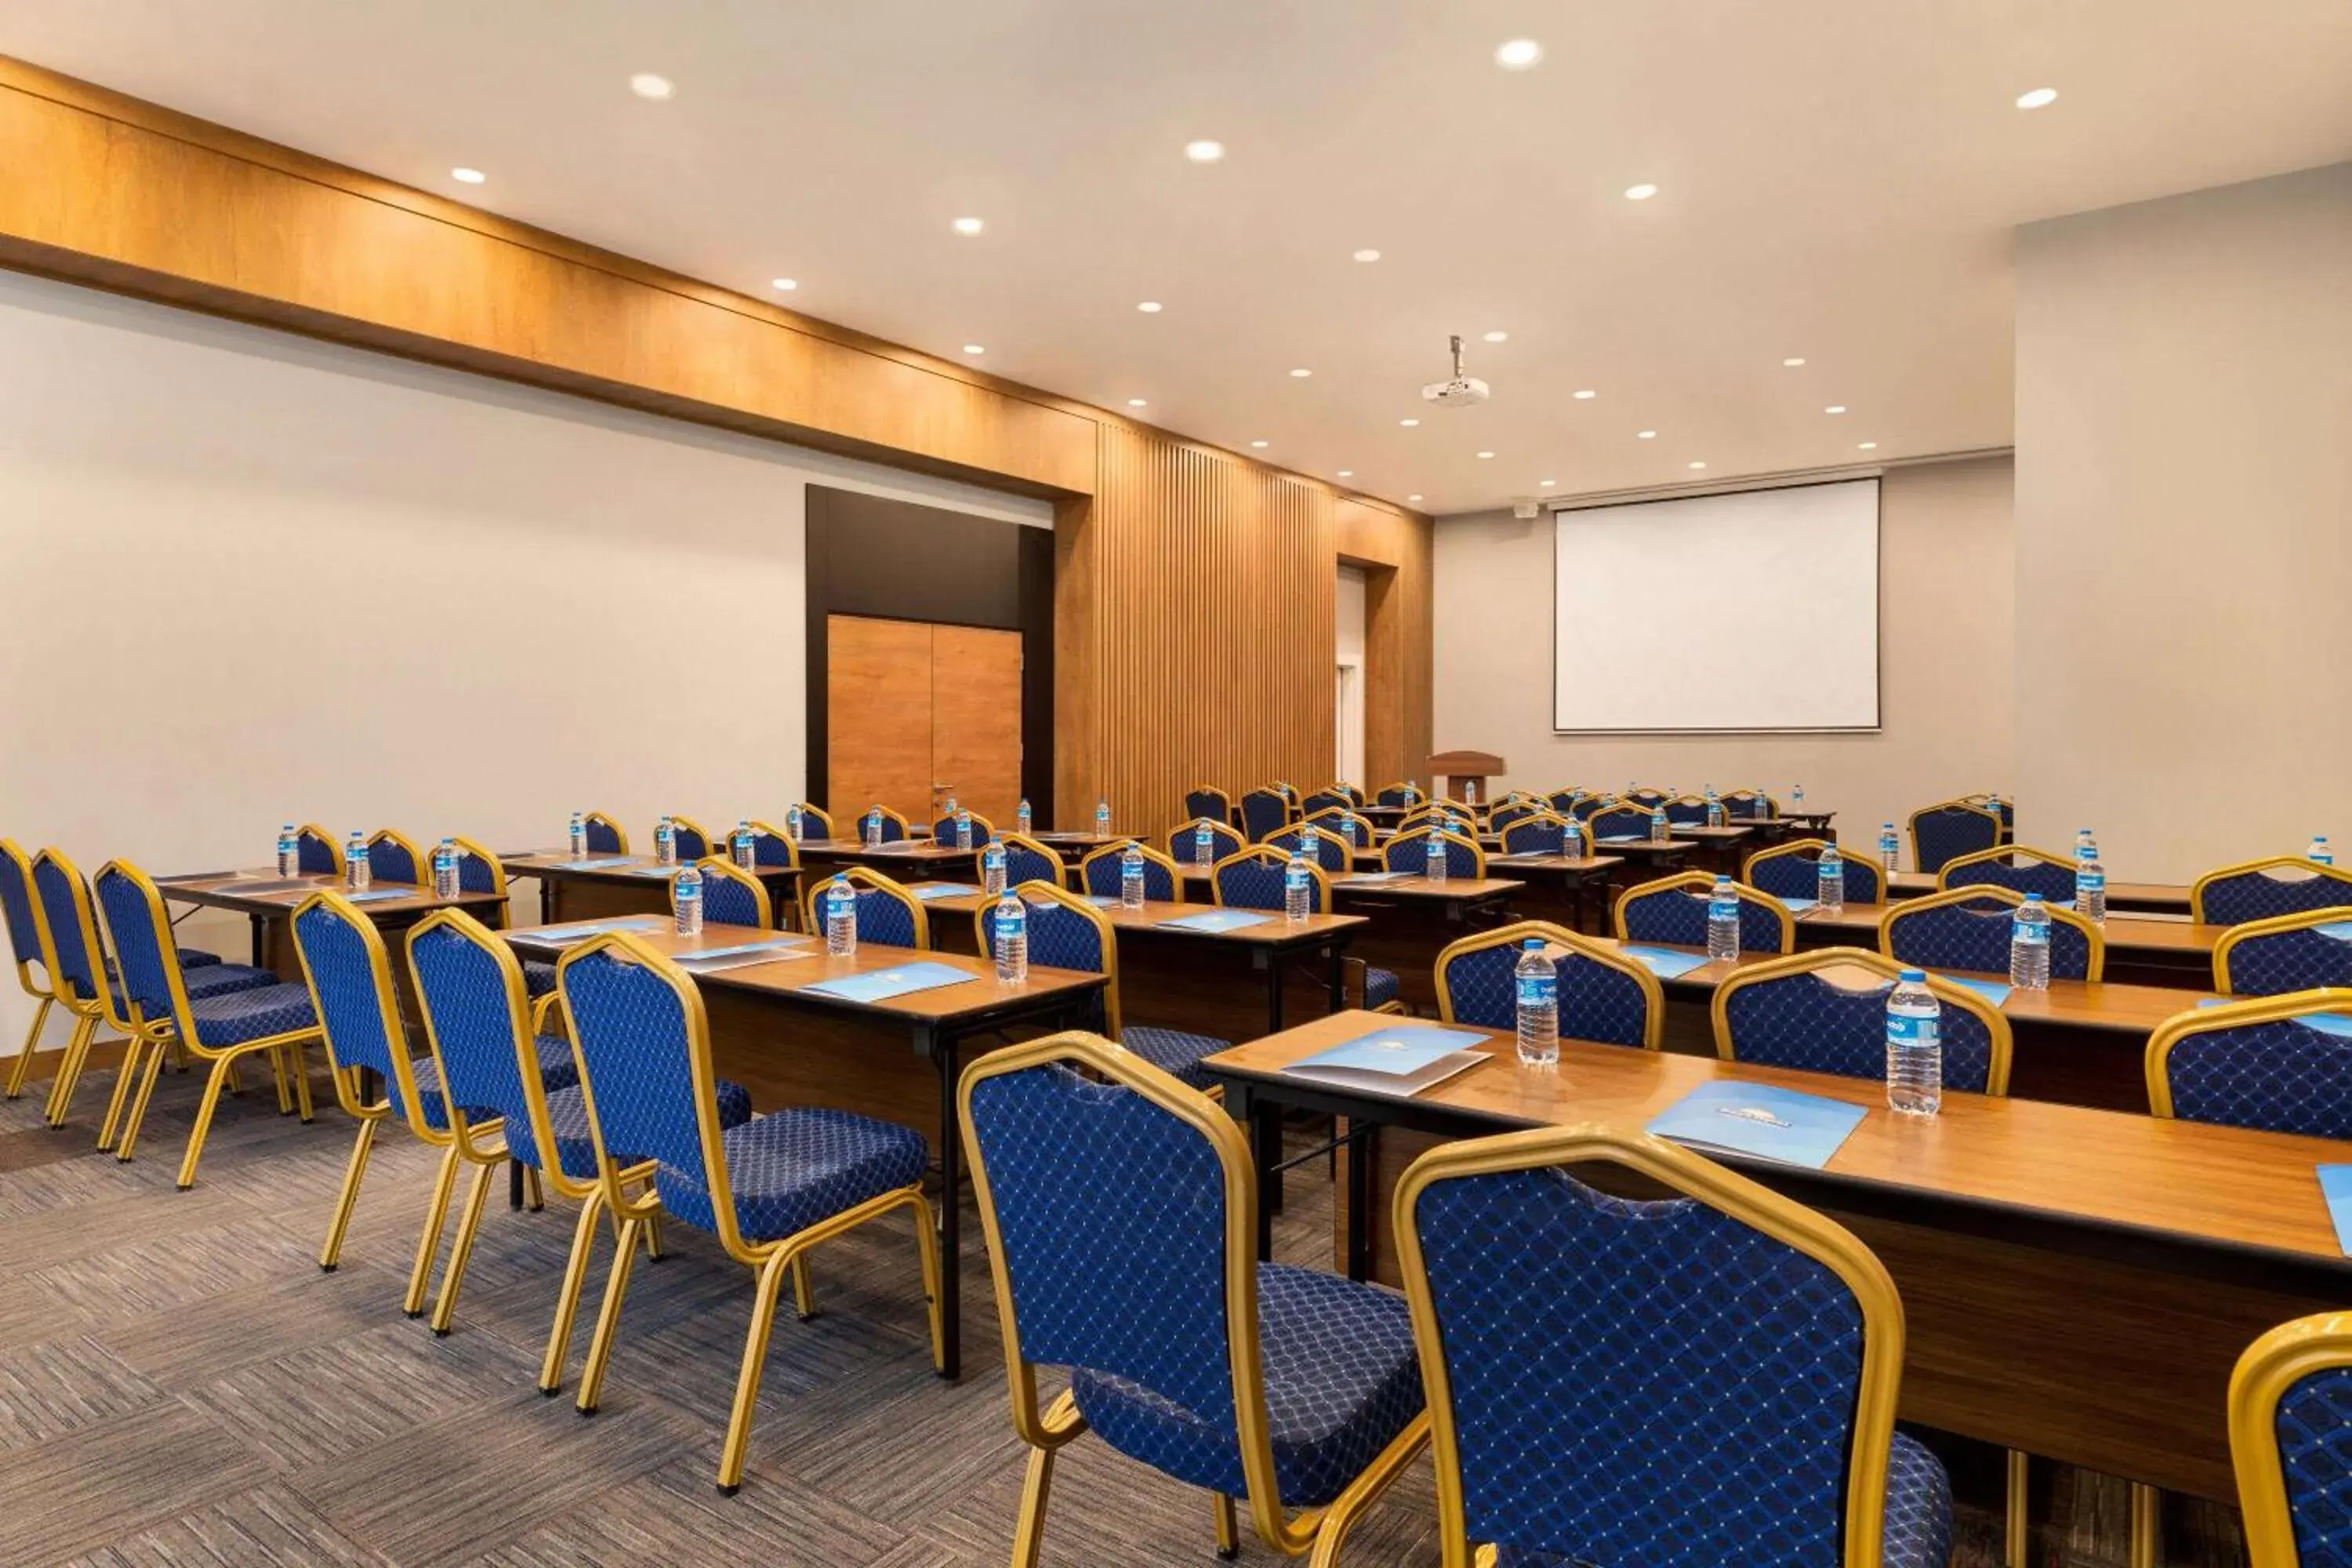 Meeting/conference room in Days Hotel by Wyndham Istanbul Esenyurt